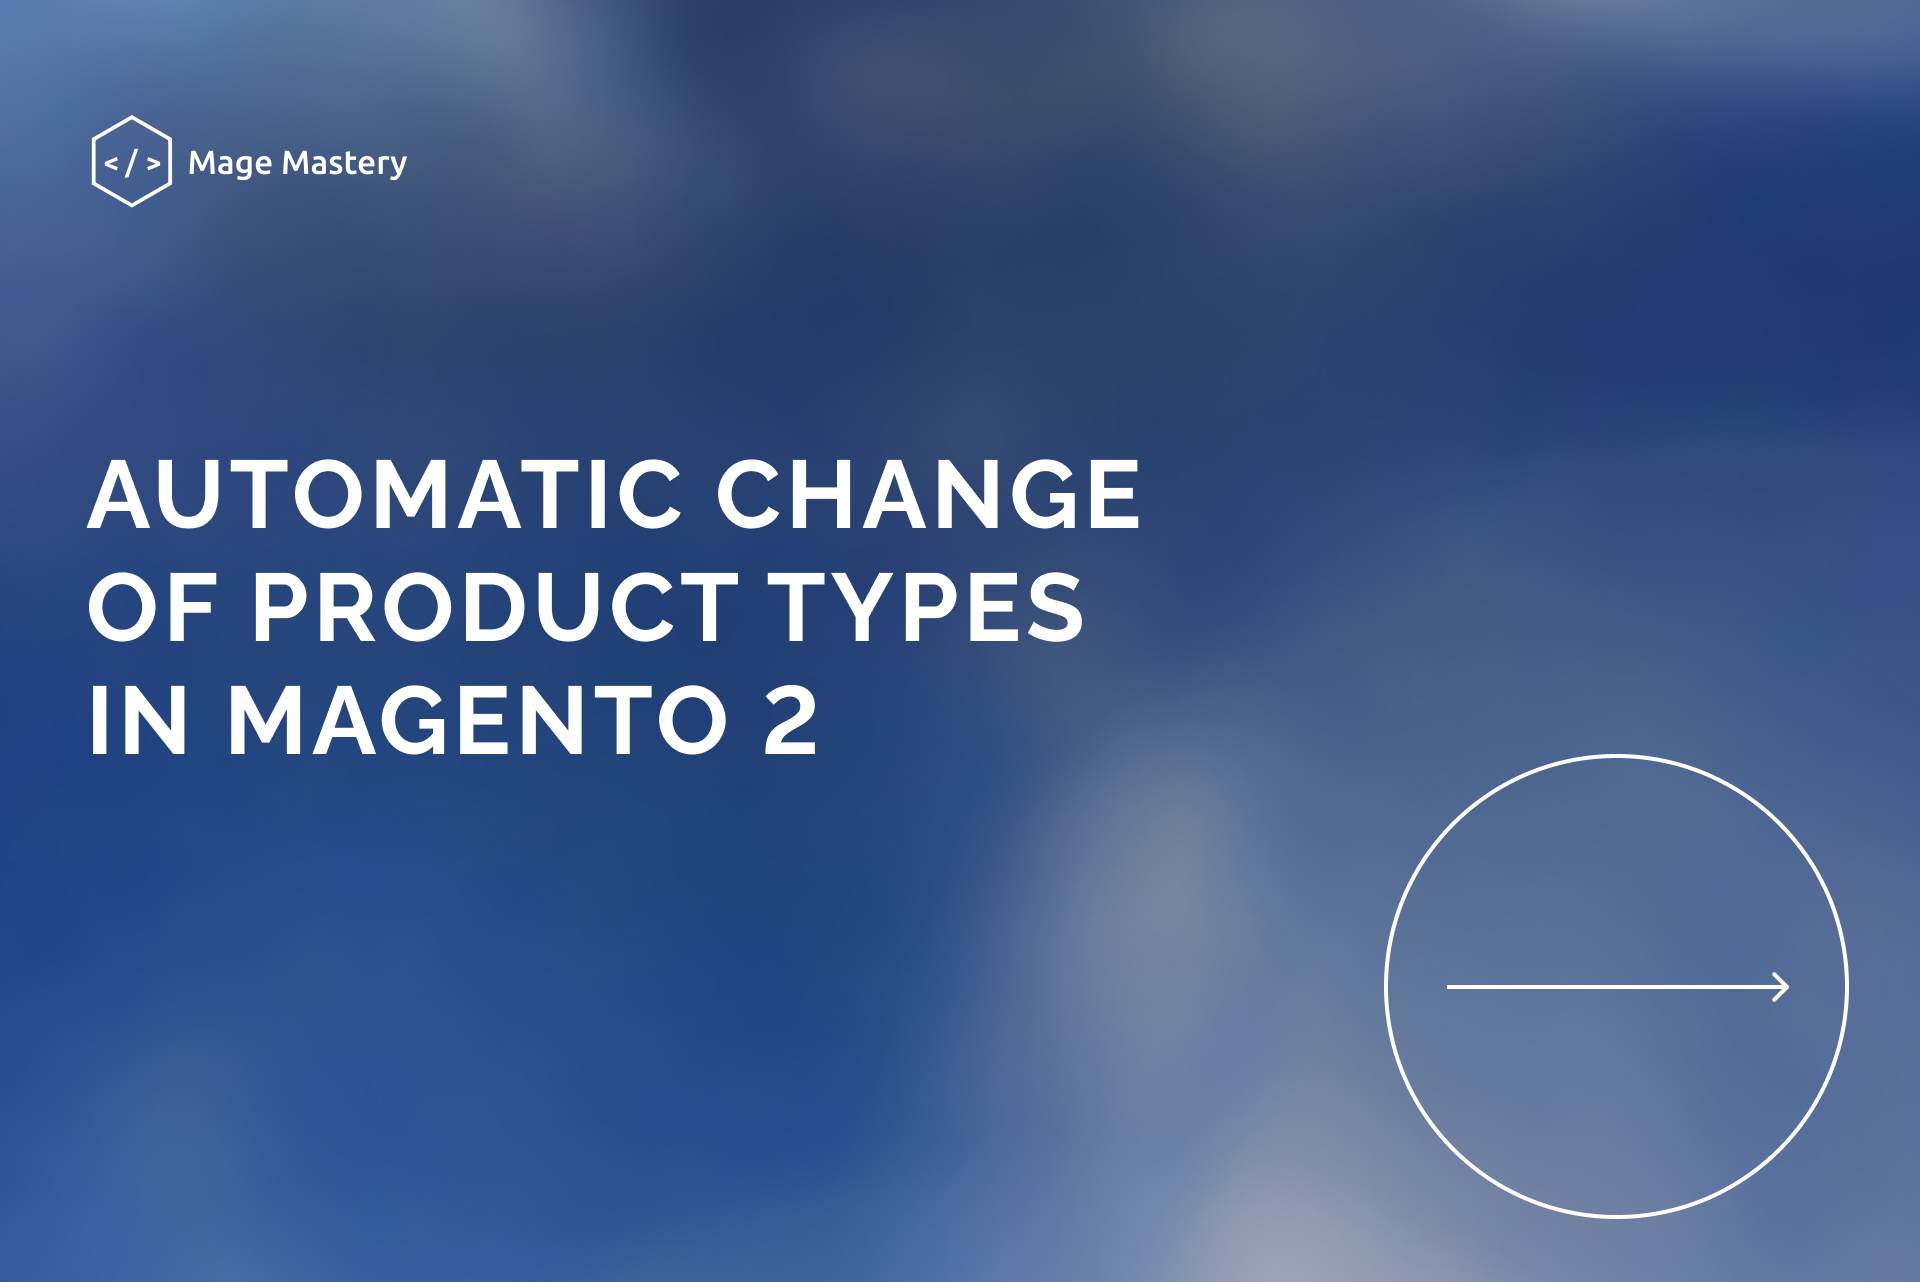 Automatic change of product types in Magento 2